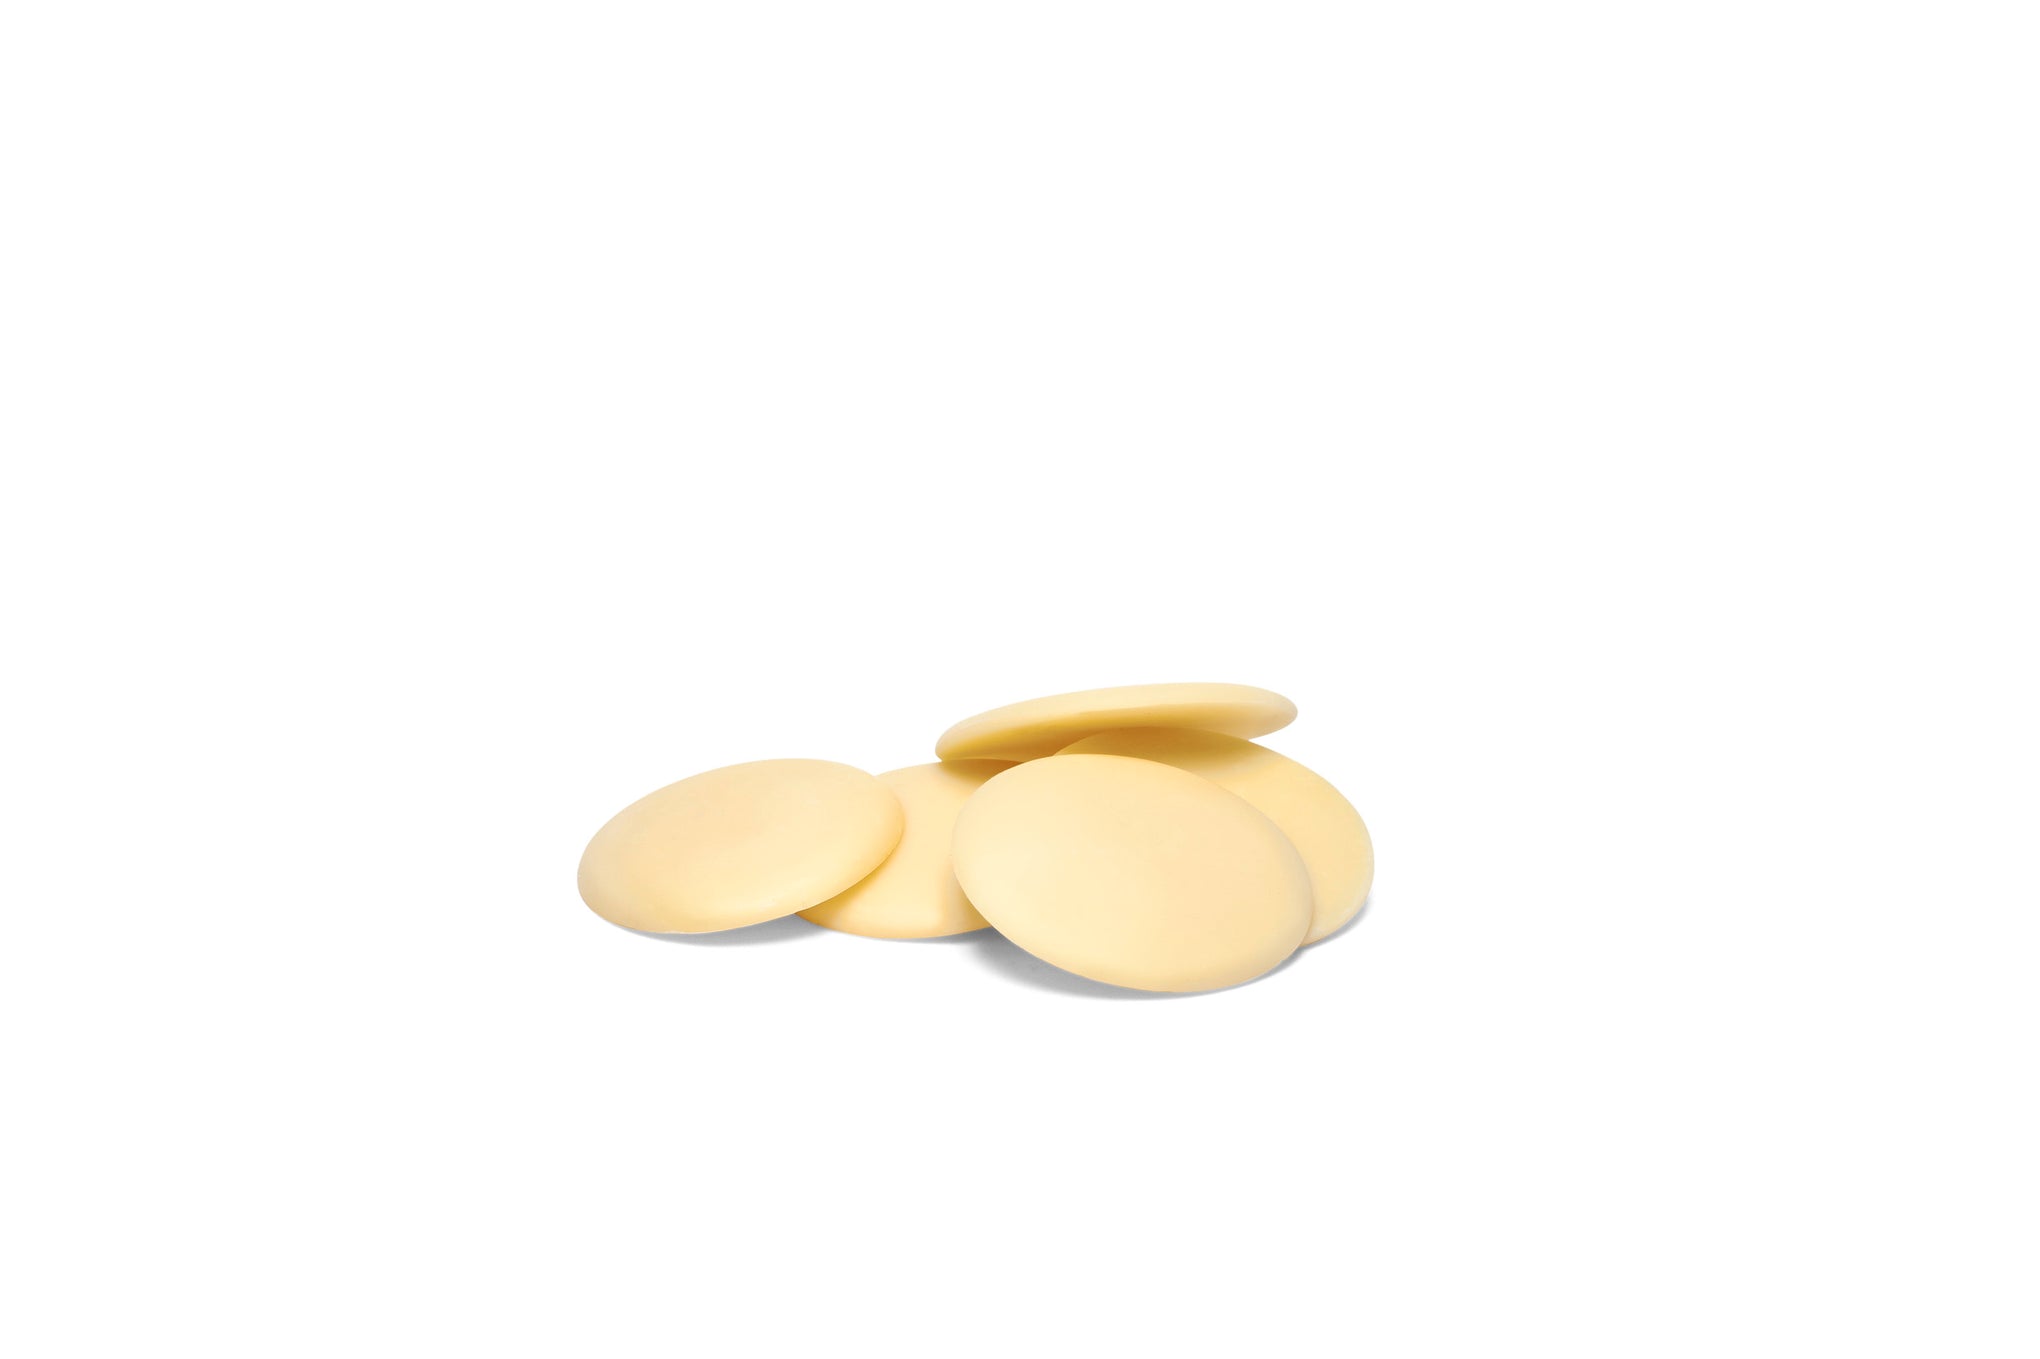 White chocolate rounds placed together